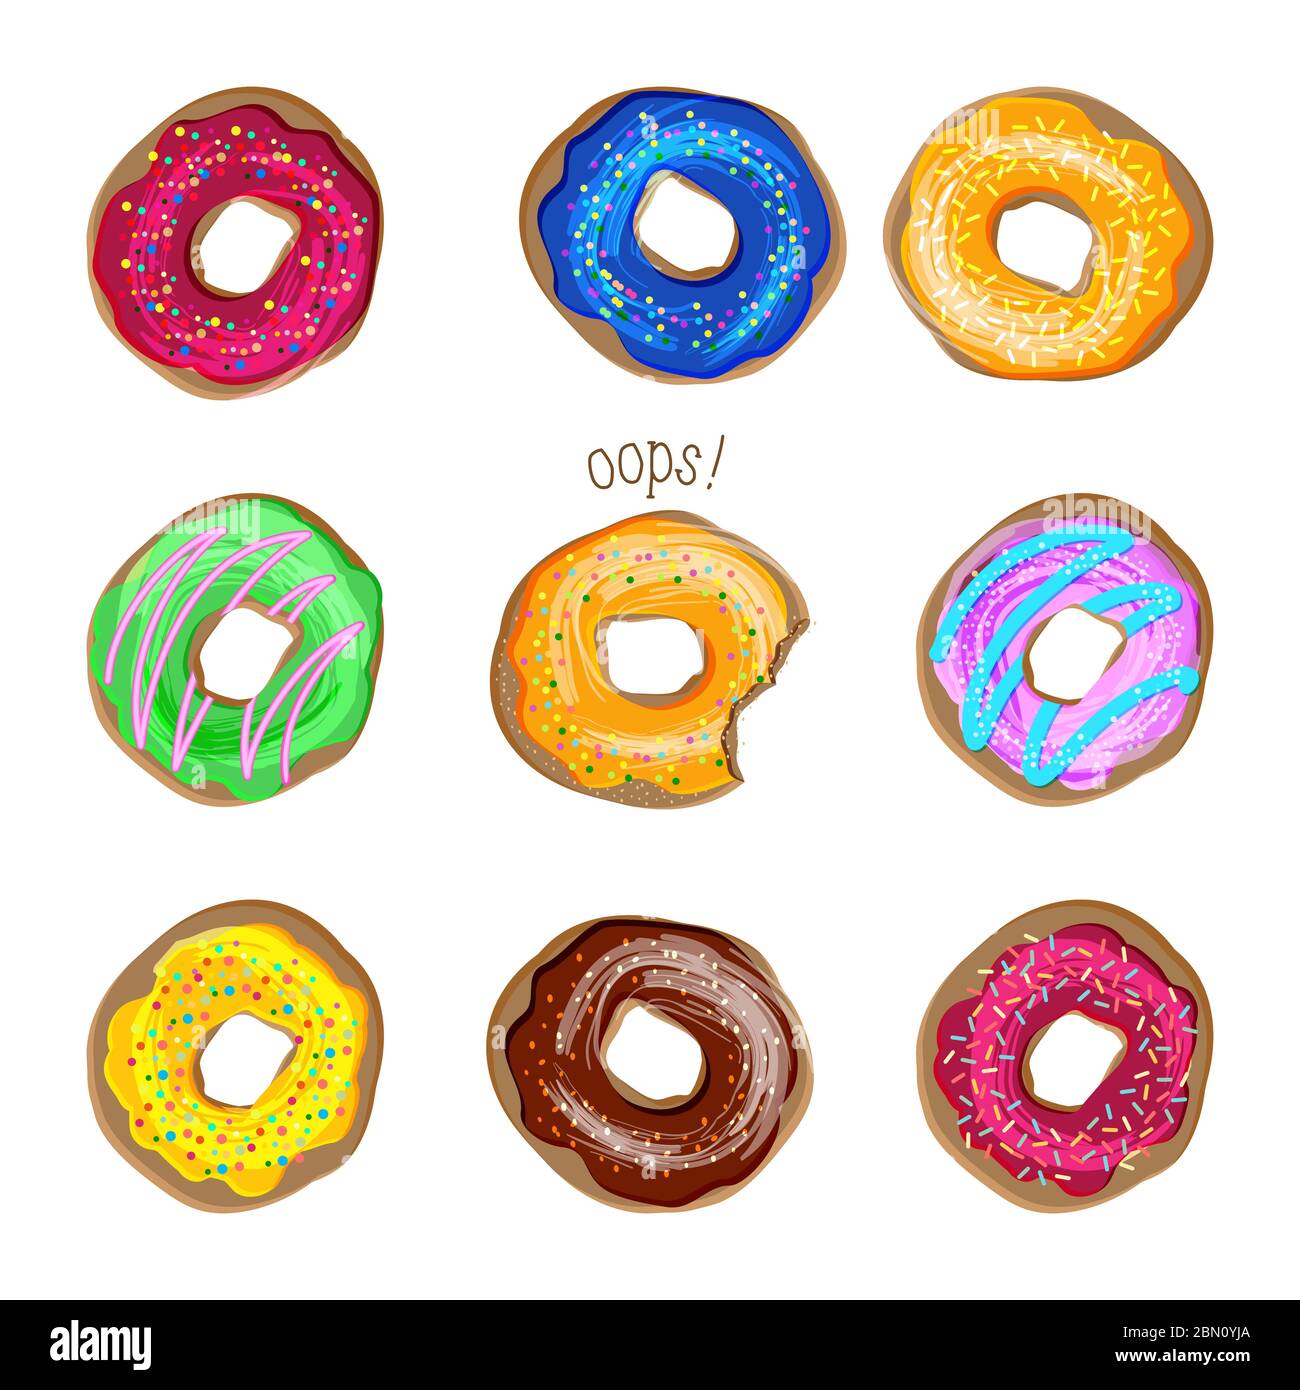 Donut vector set. Coloured donuts with different icings and sprinkles. Sweet desserts cakes doughnut cookies. Bakery set of donuts, donut collection i Stock Vector